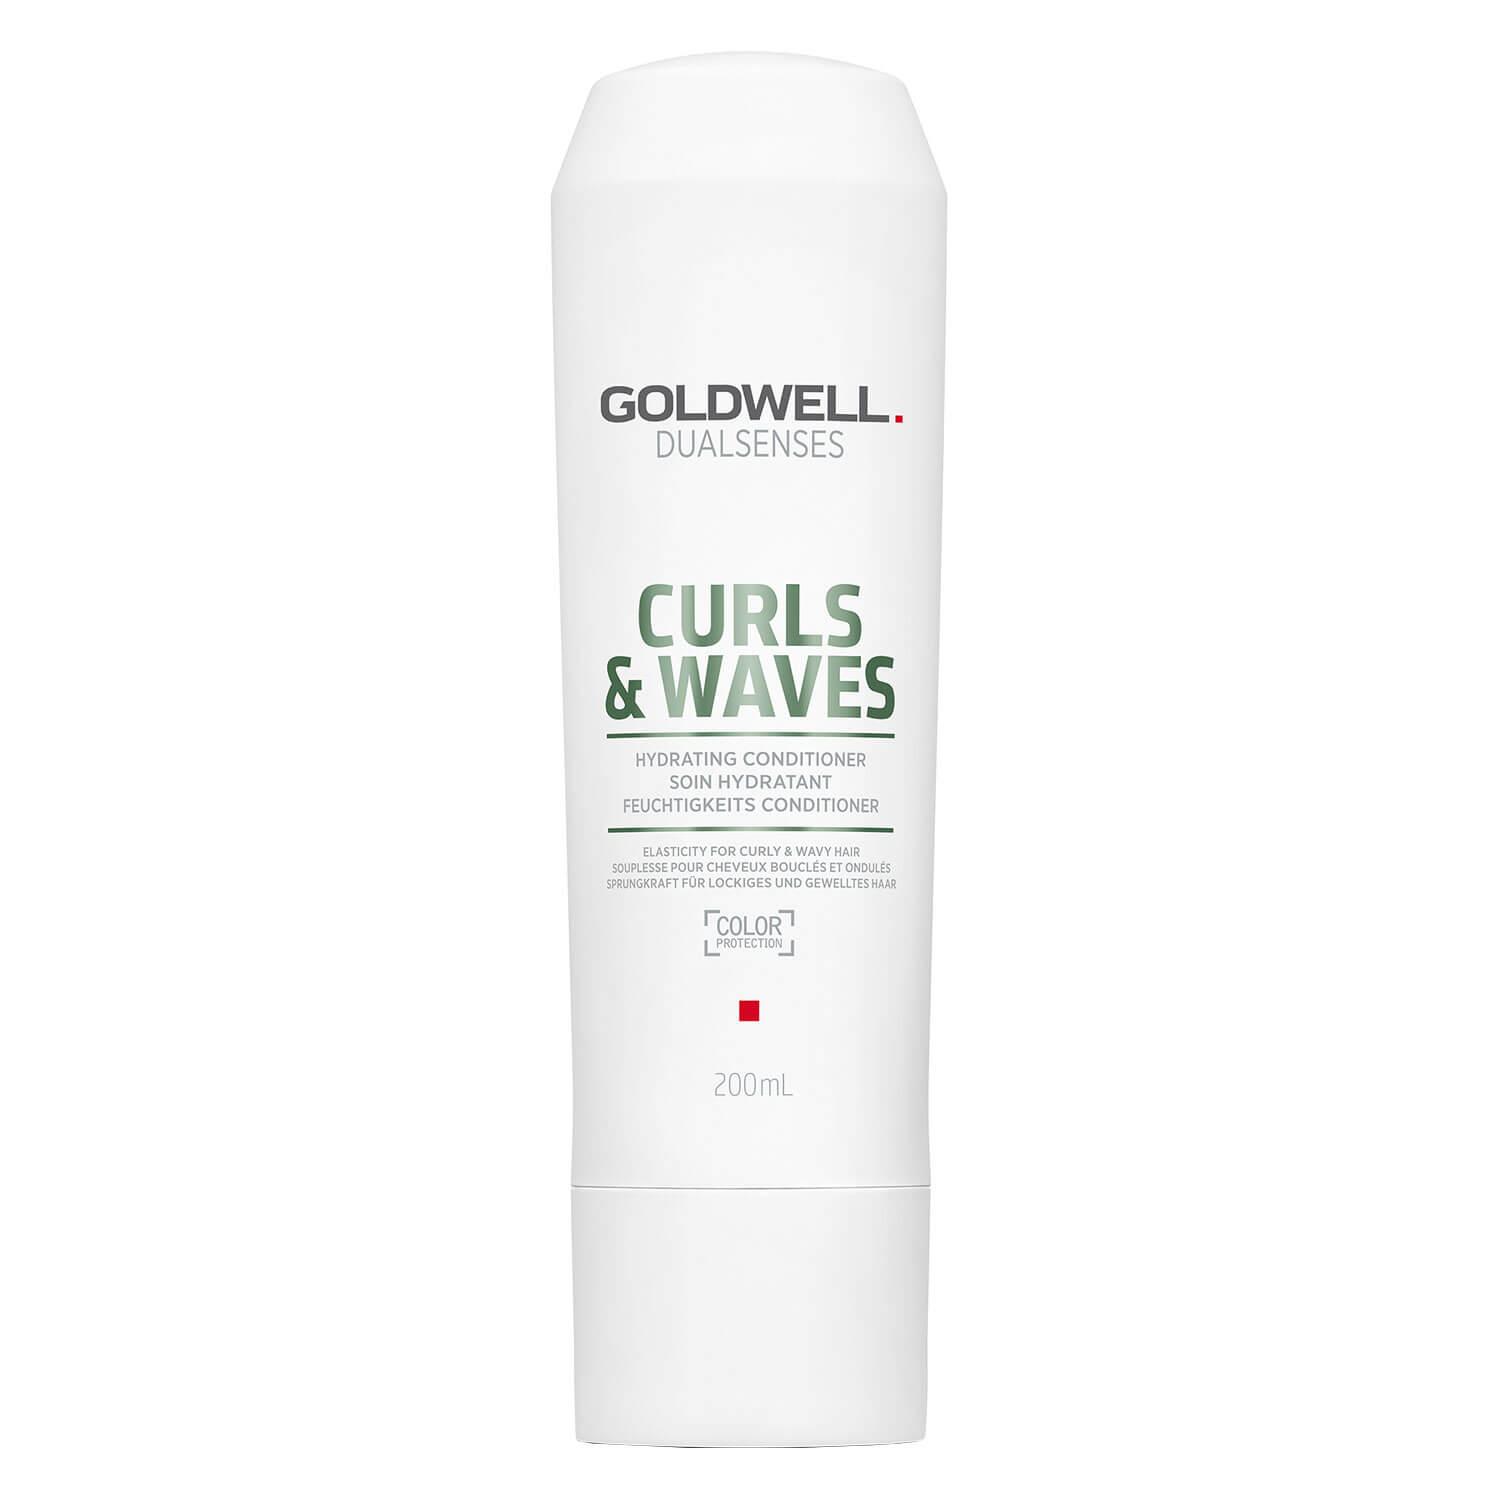 Dualsenses Curls & Waves - Hydrating Conditioner